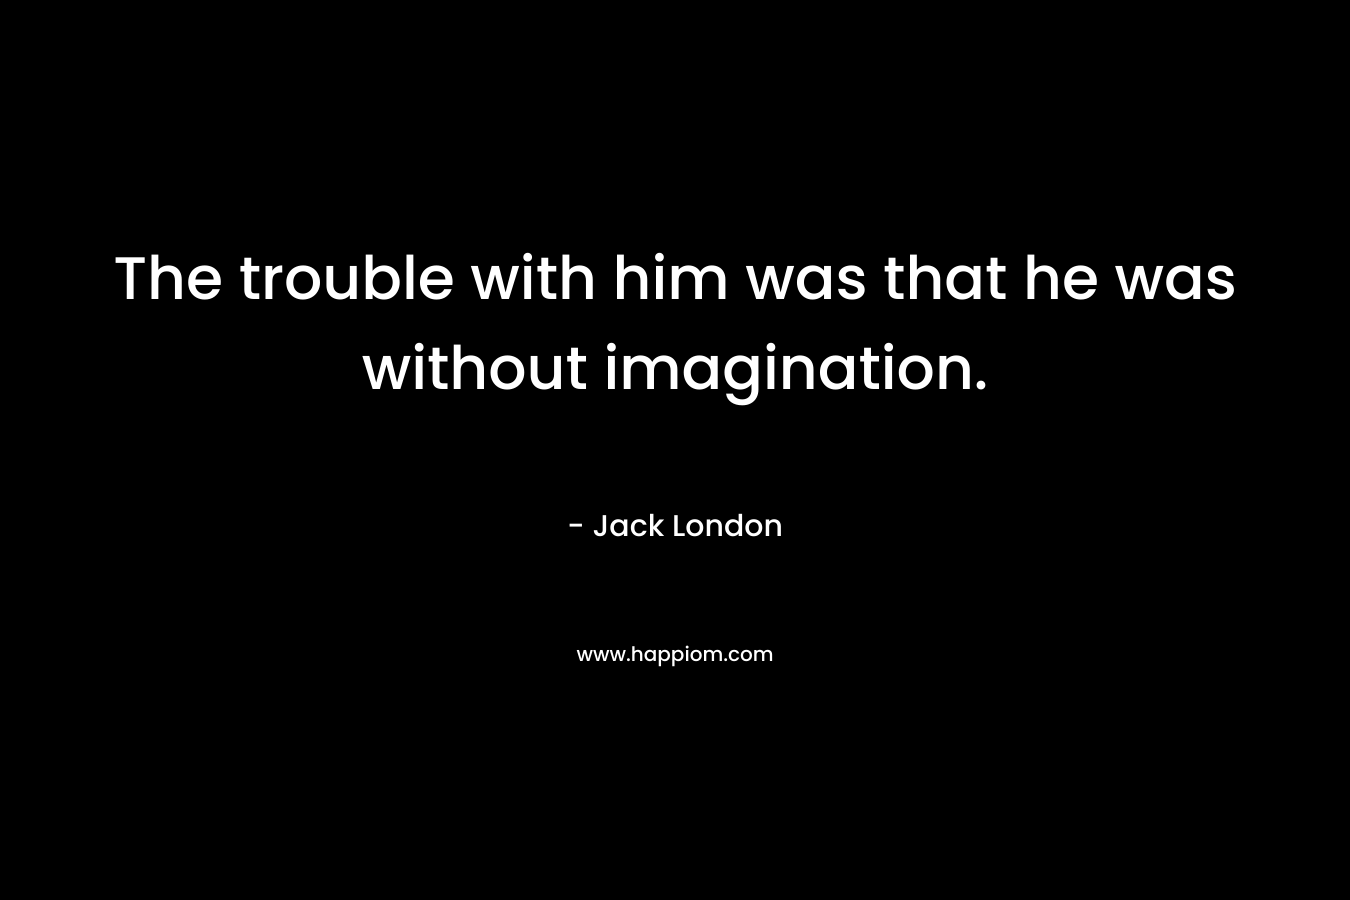 The trouble with him was that he was without imagination.